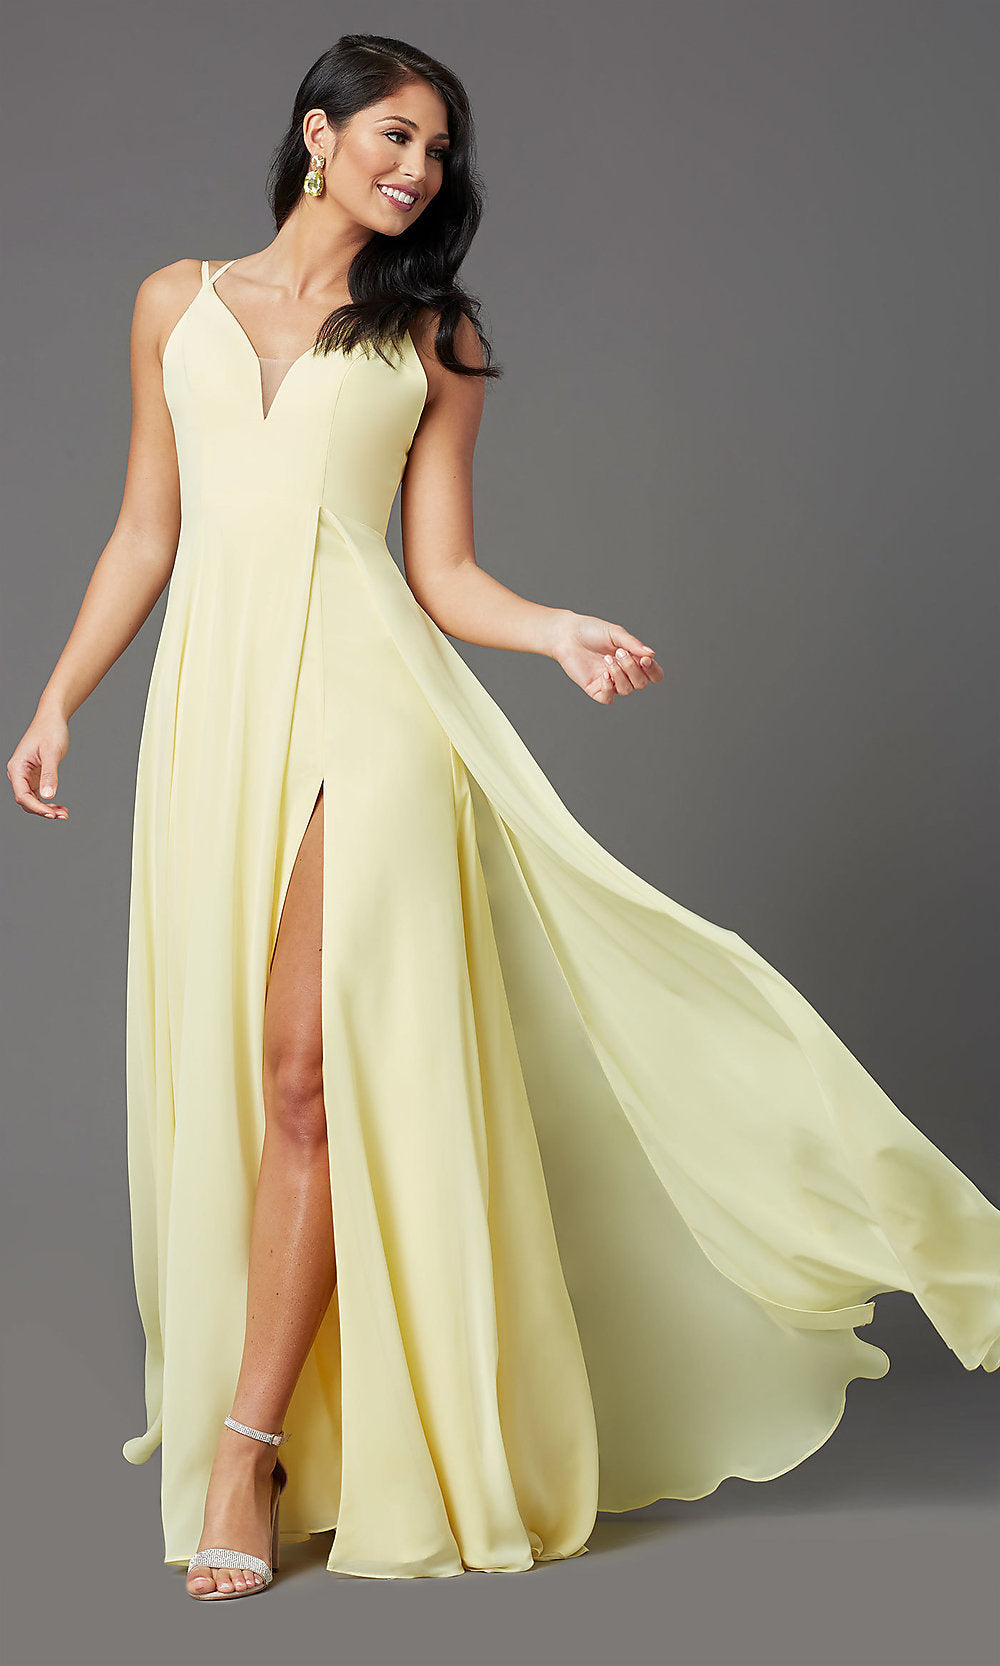 Daffodil Caged-Back Long Formal Prom Dress by PromGirl